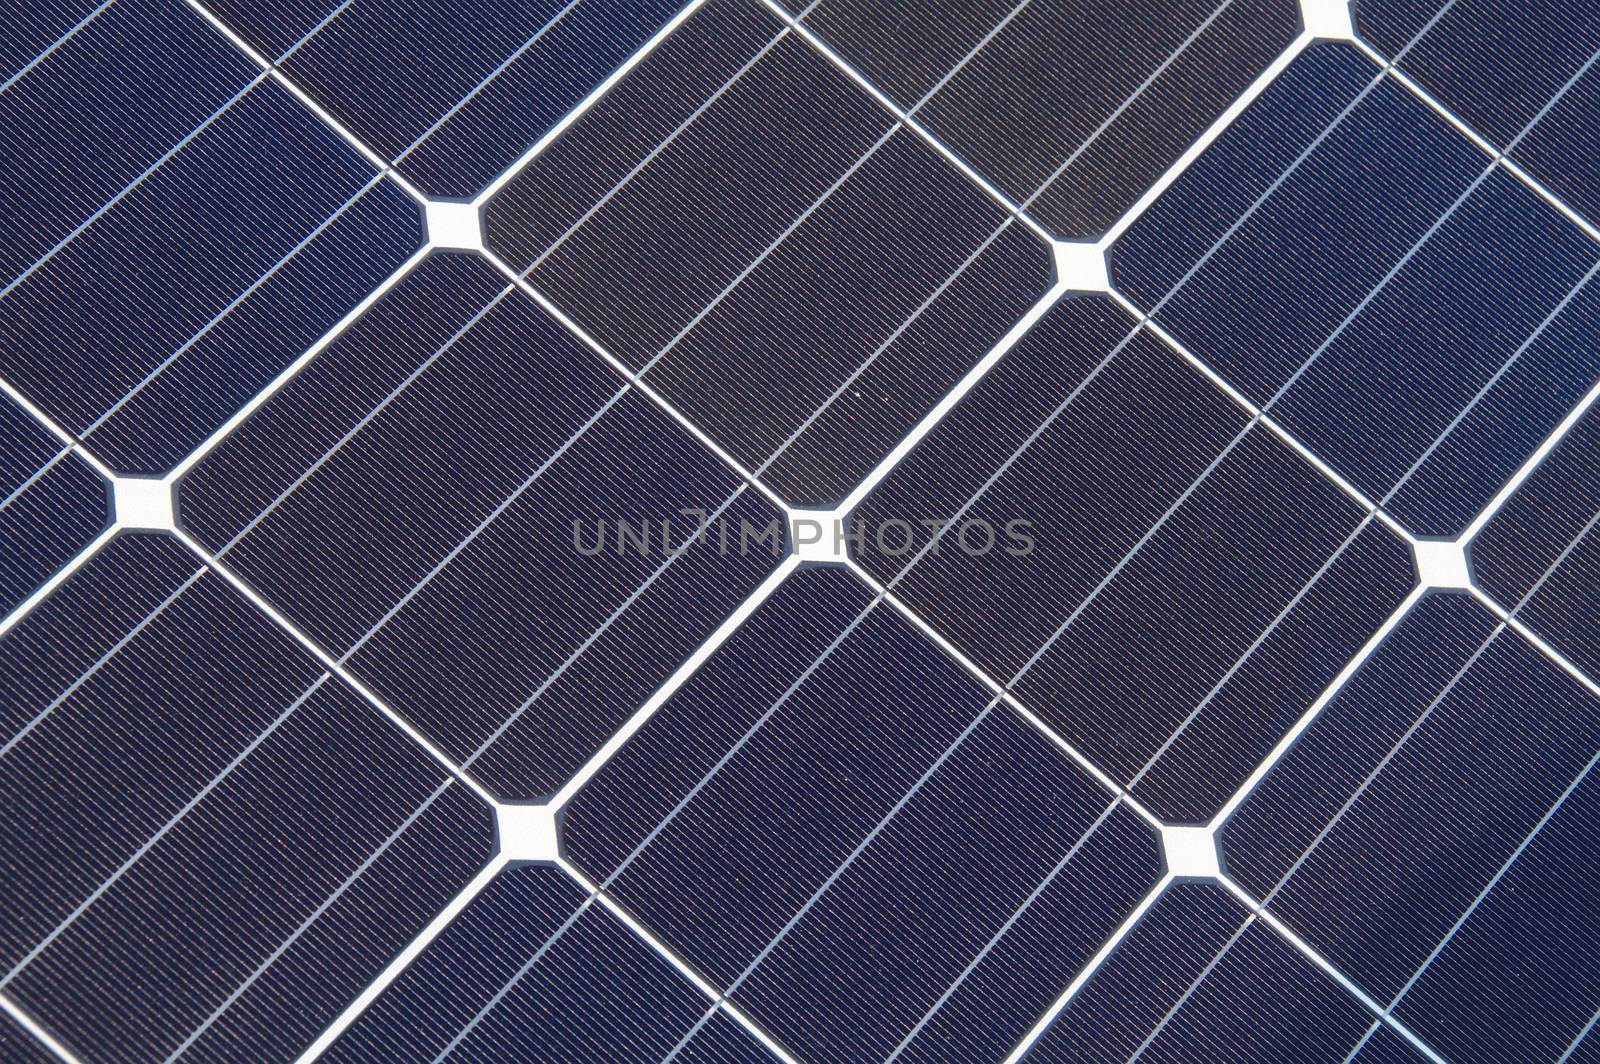 Closeup of solar panel filled with solar cells.